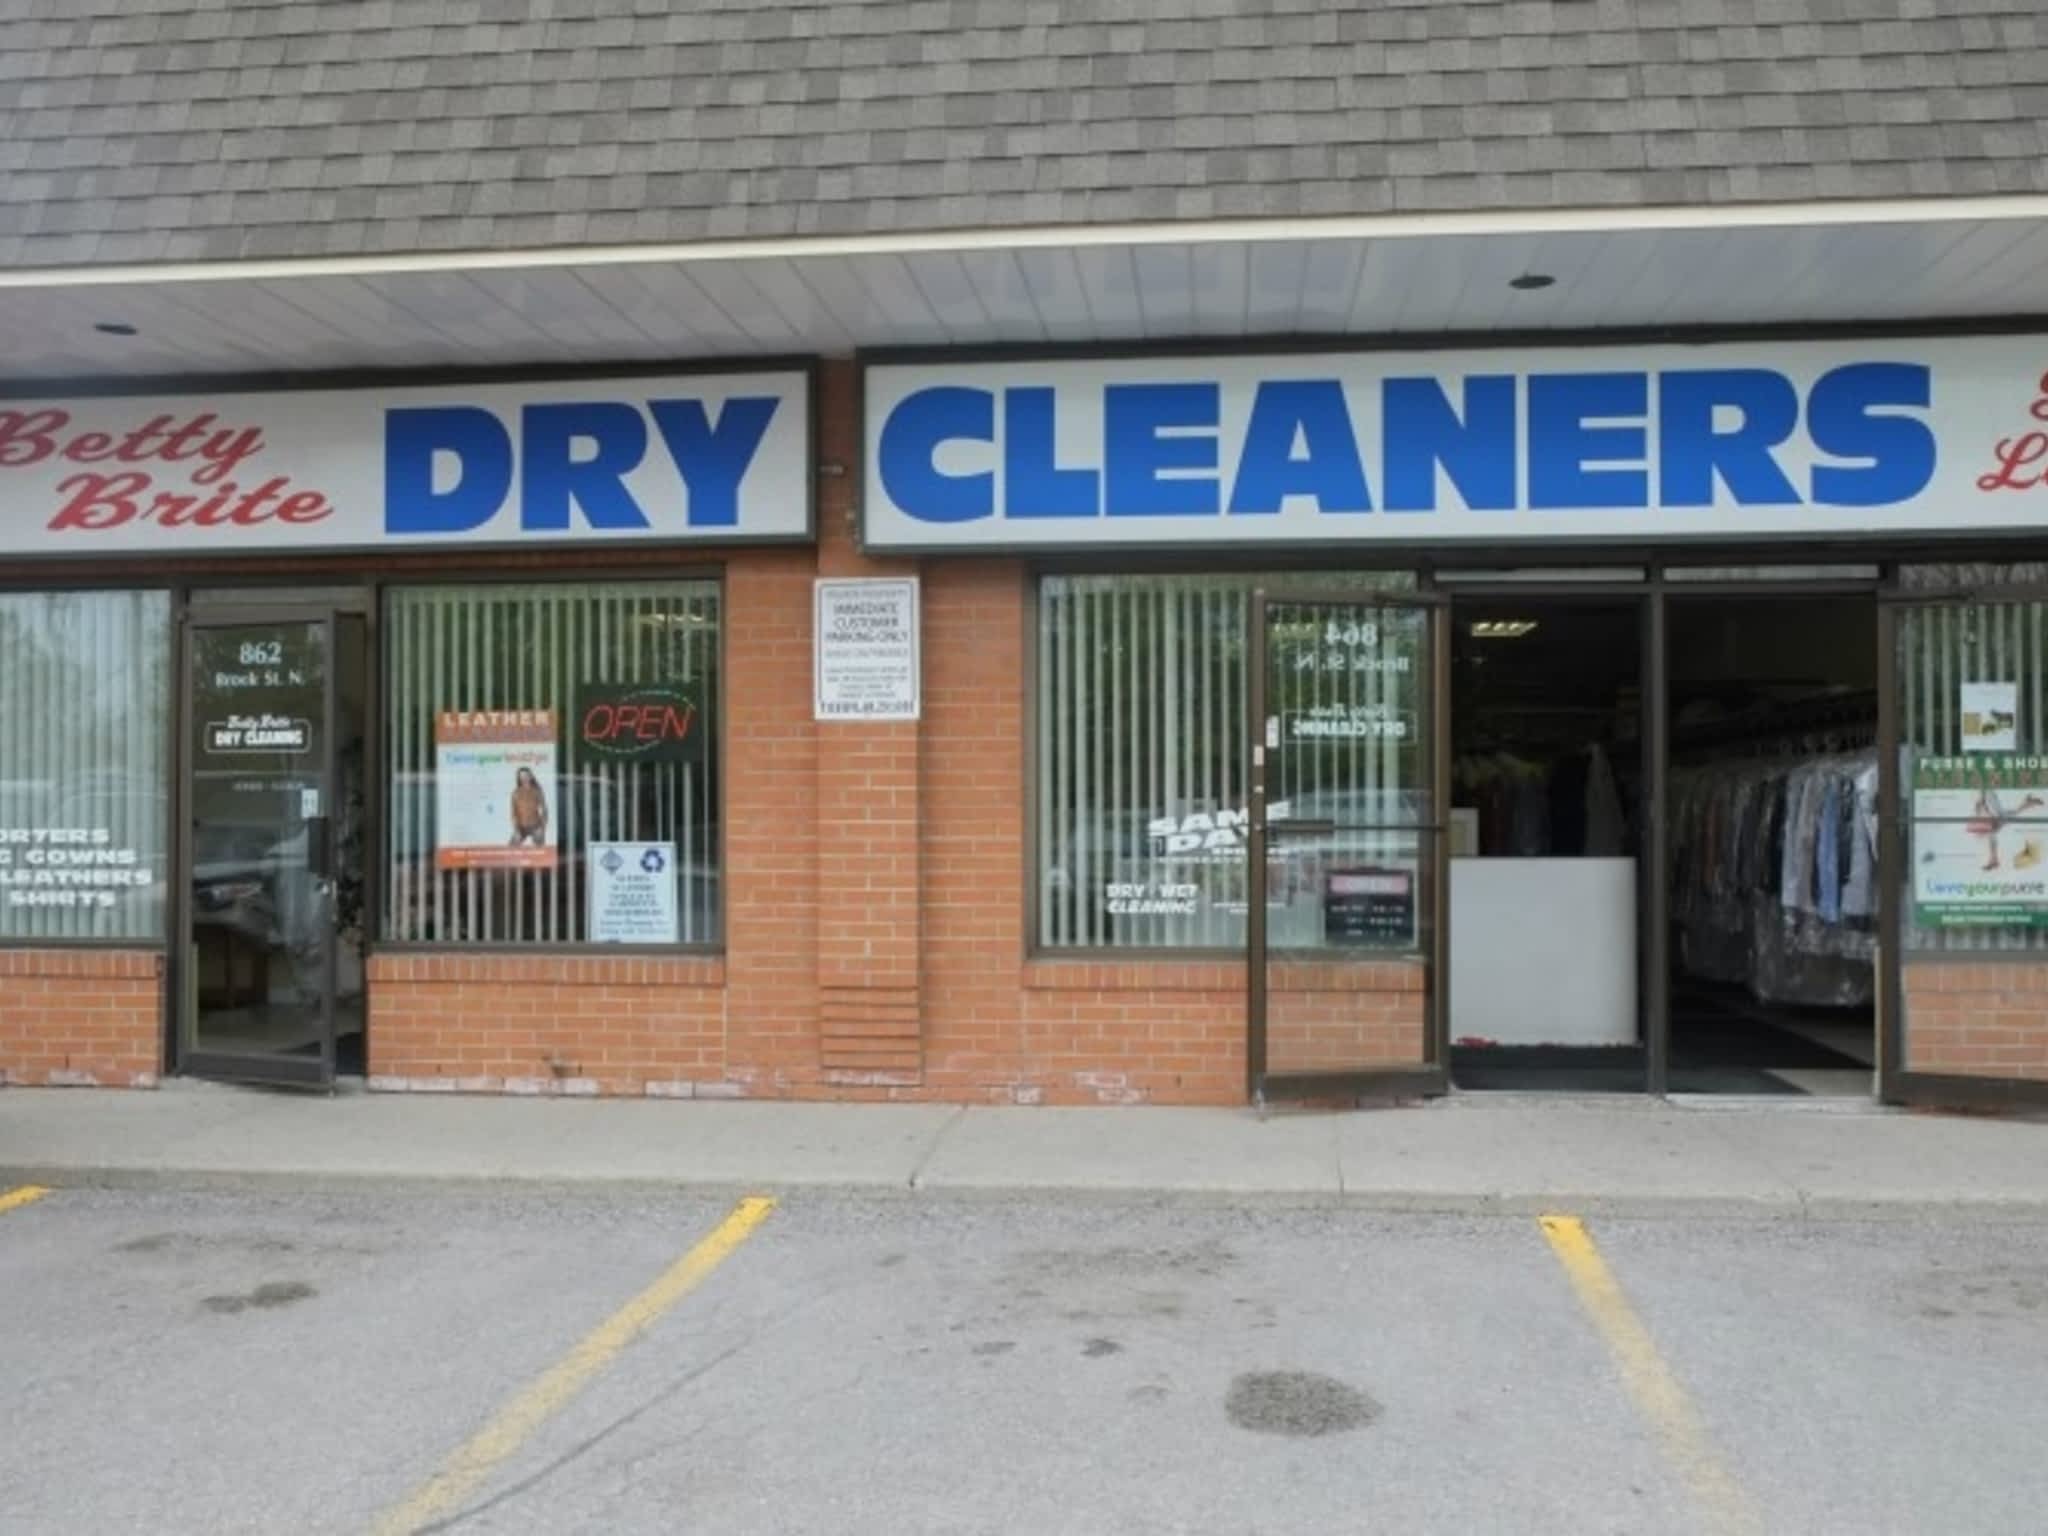 photo Betty Brite Dry Cleaners